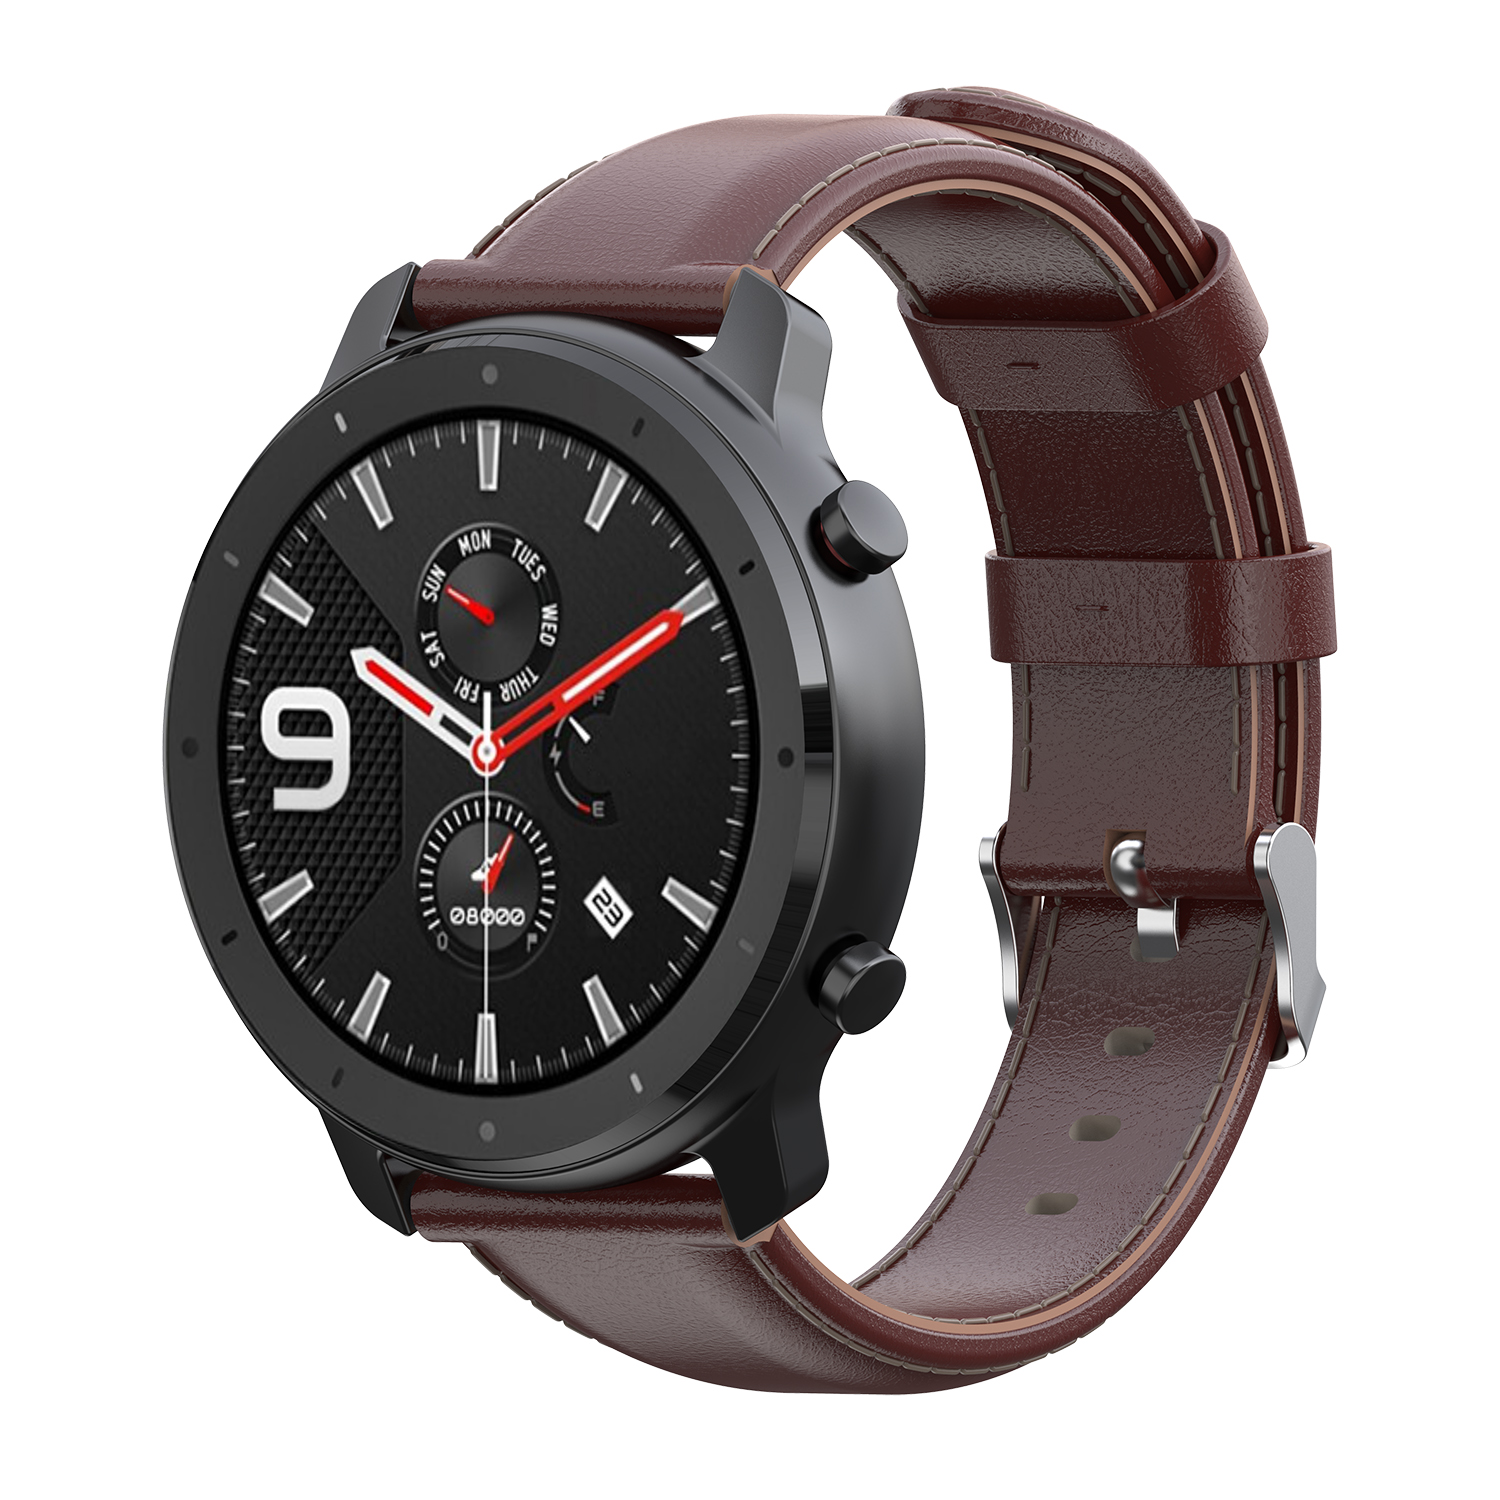 Bakeey-22mm-Genuine-Leather-Replacement-Strap-Smart-Watch-Band-For-Amazfit-GTR-47MM-1786519-25